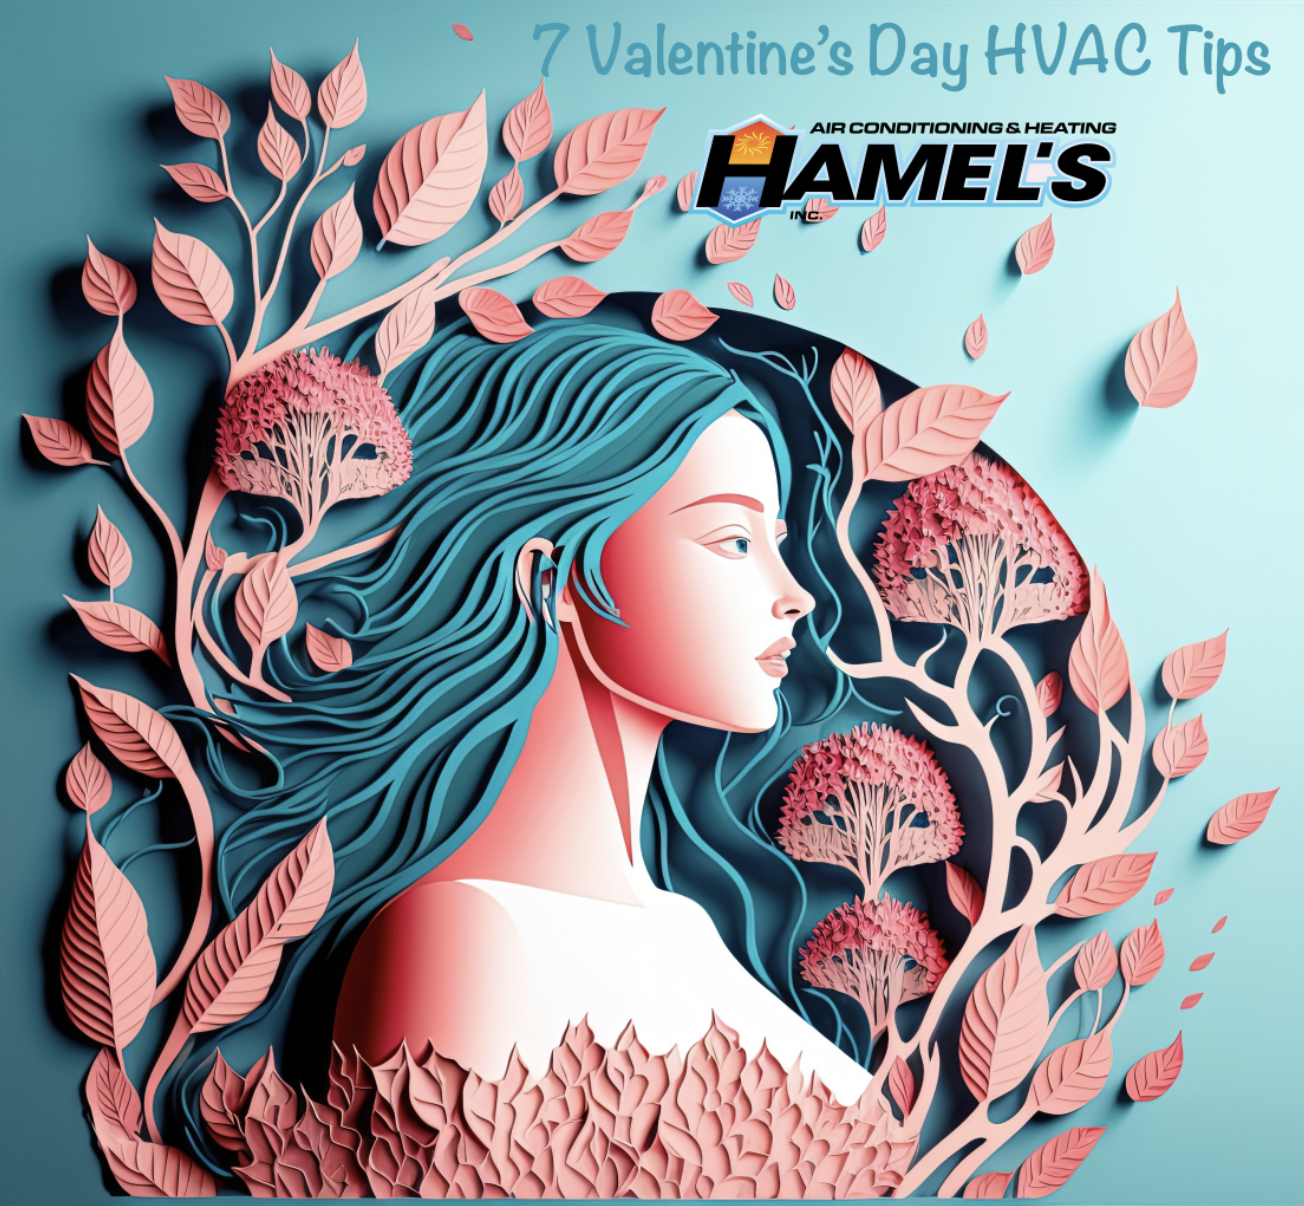 7 HVAC tips for valentines day in San Diego